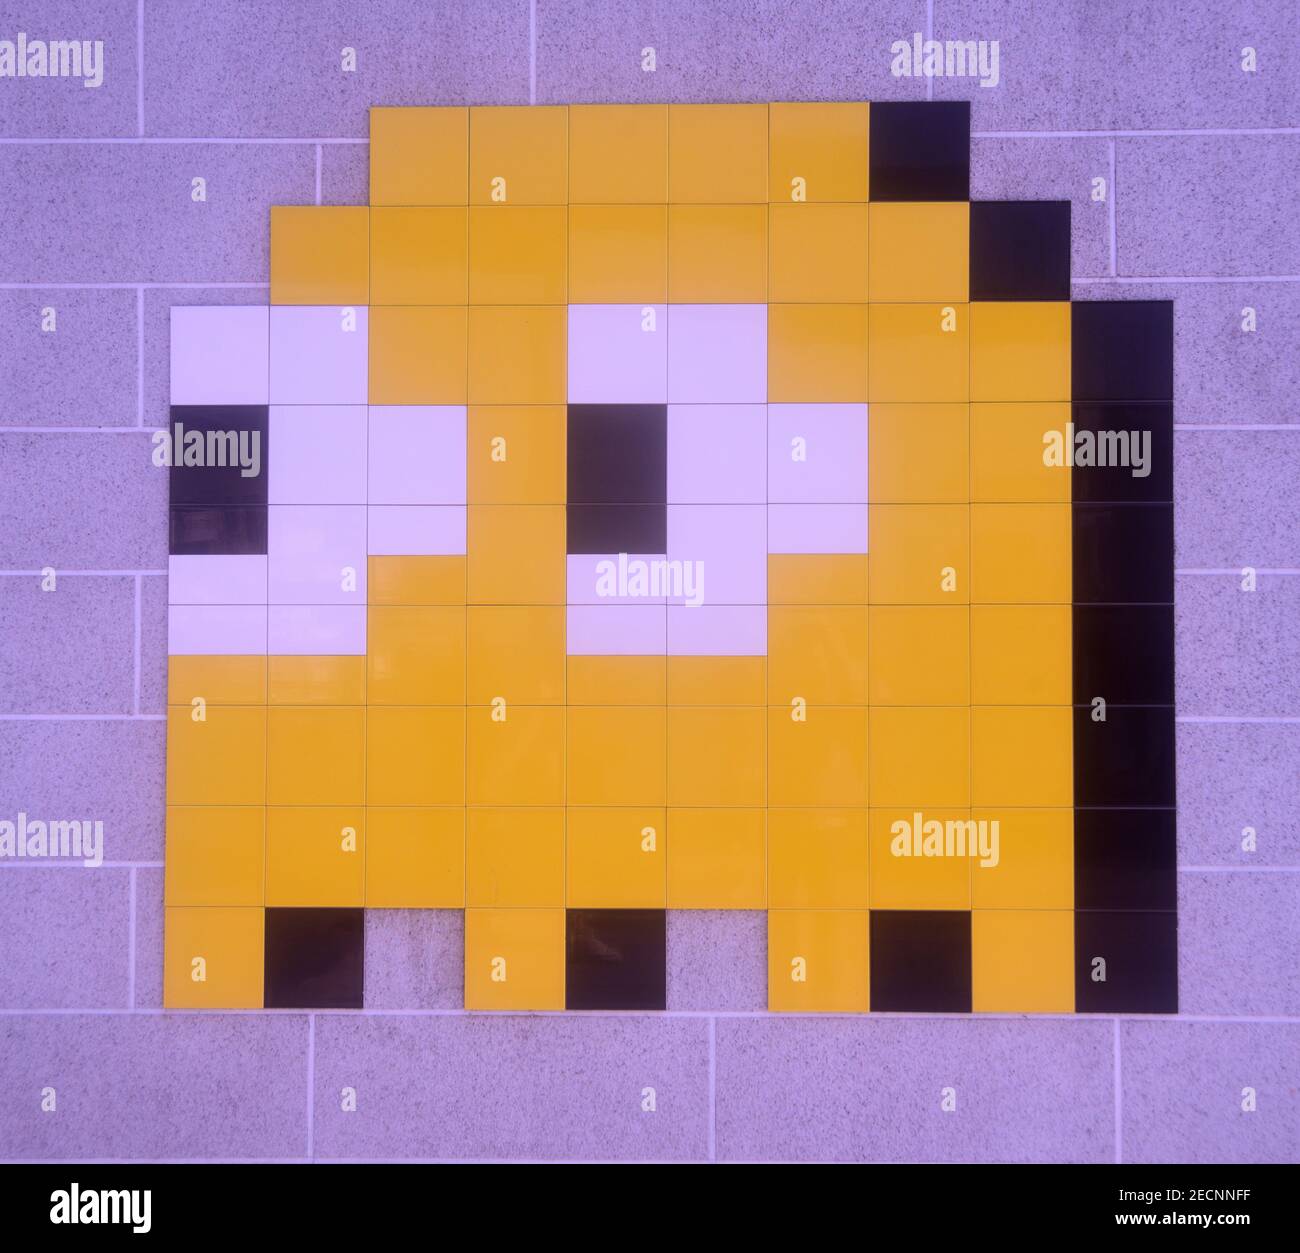 Pixelated image of Pac Man game character Kinkky, formed by tiles and mounted on wall Stock Photo